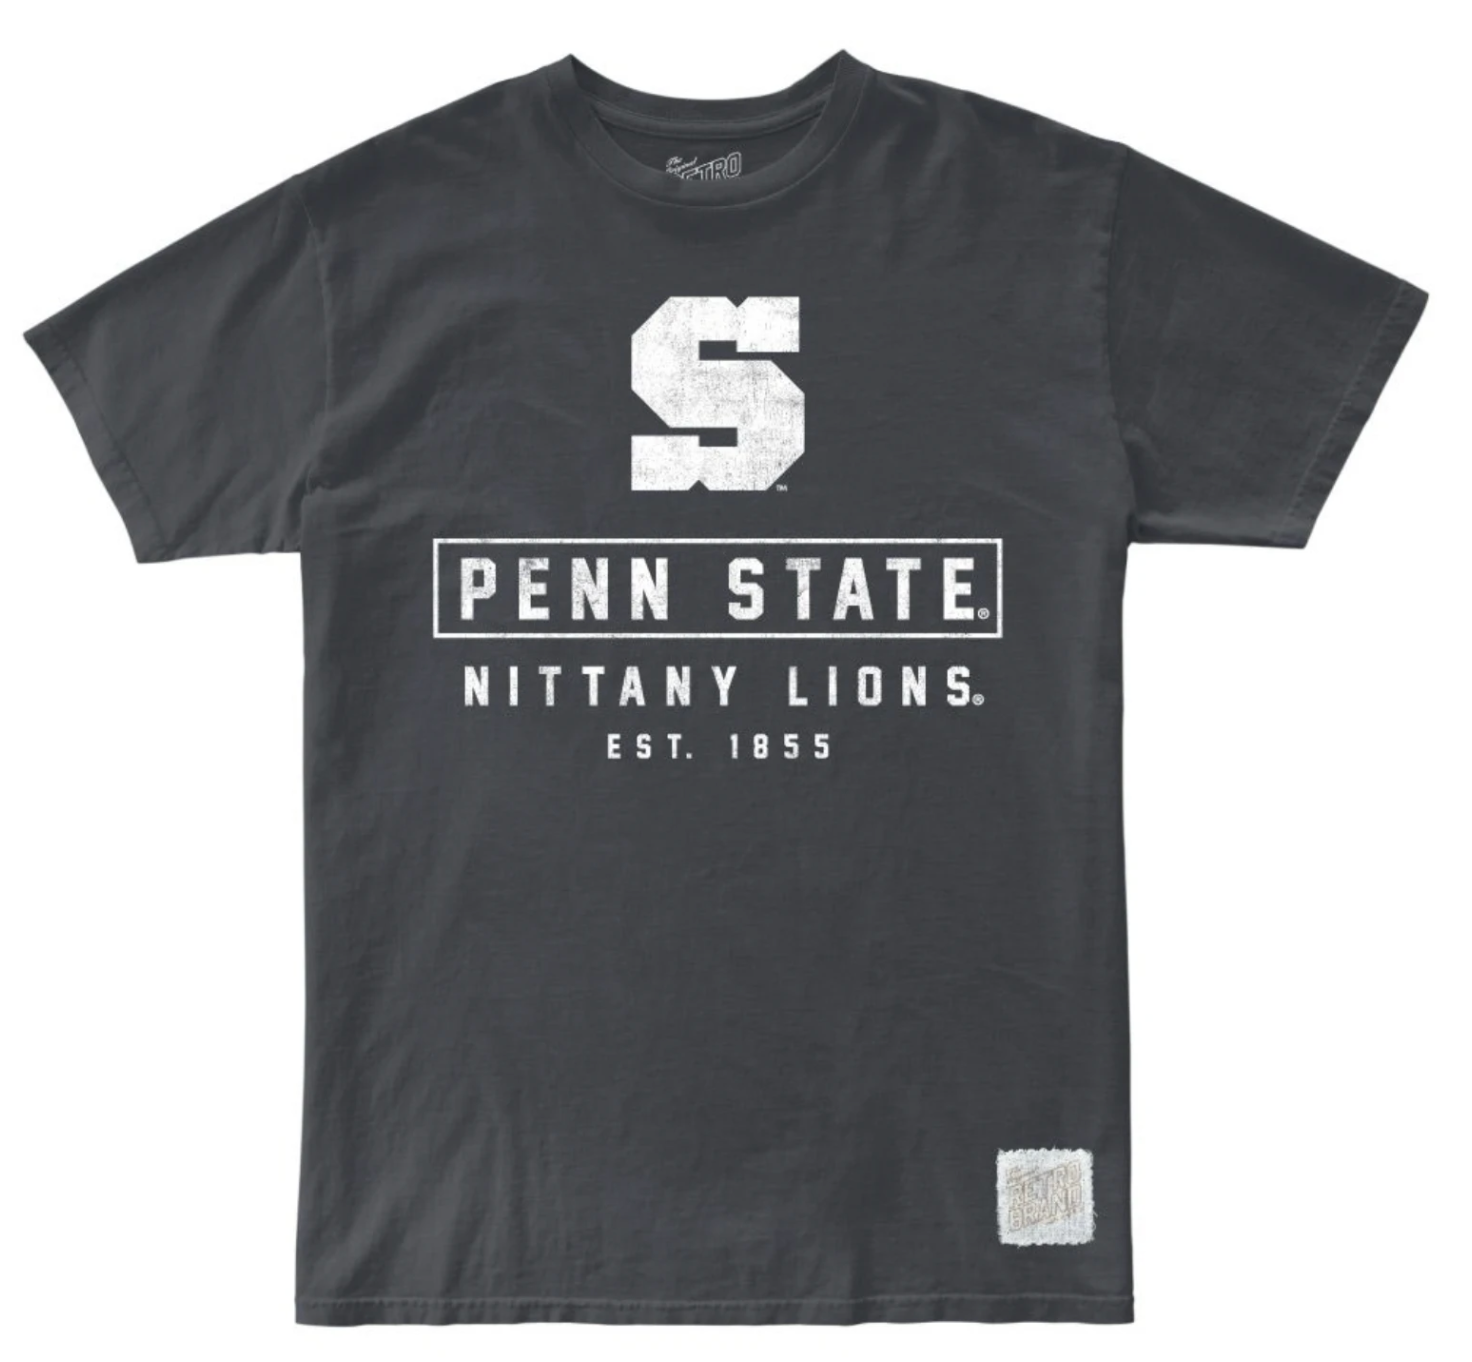 Penn State Nittany Lions 100% Cotton Unisex Tee